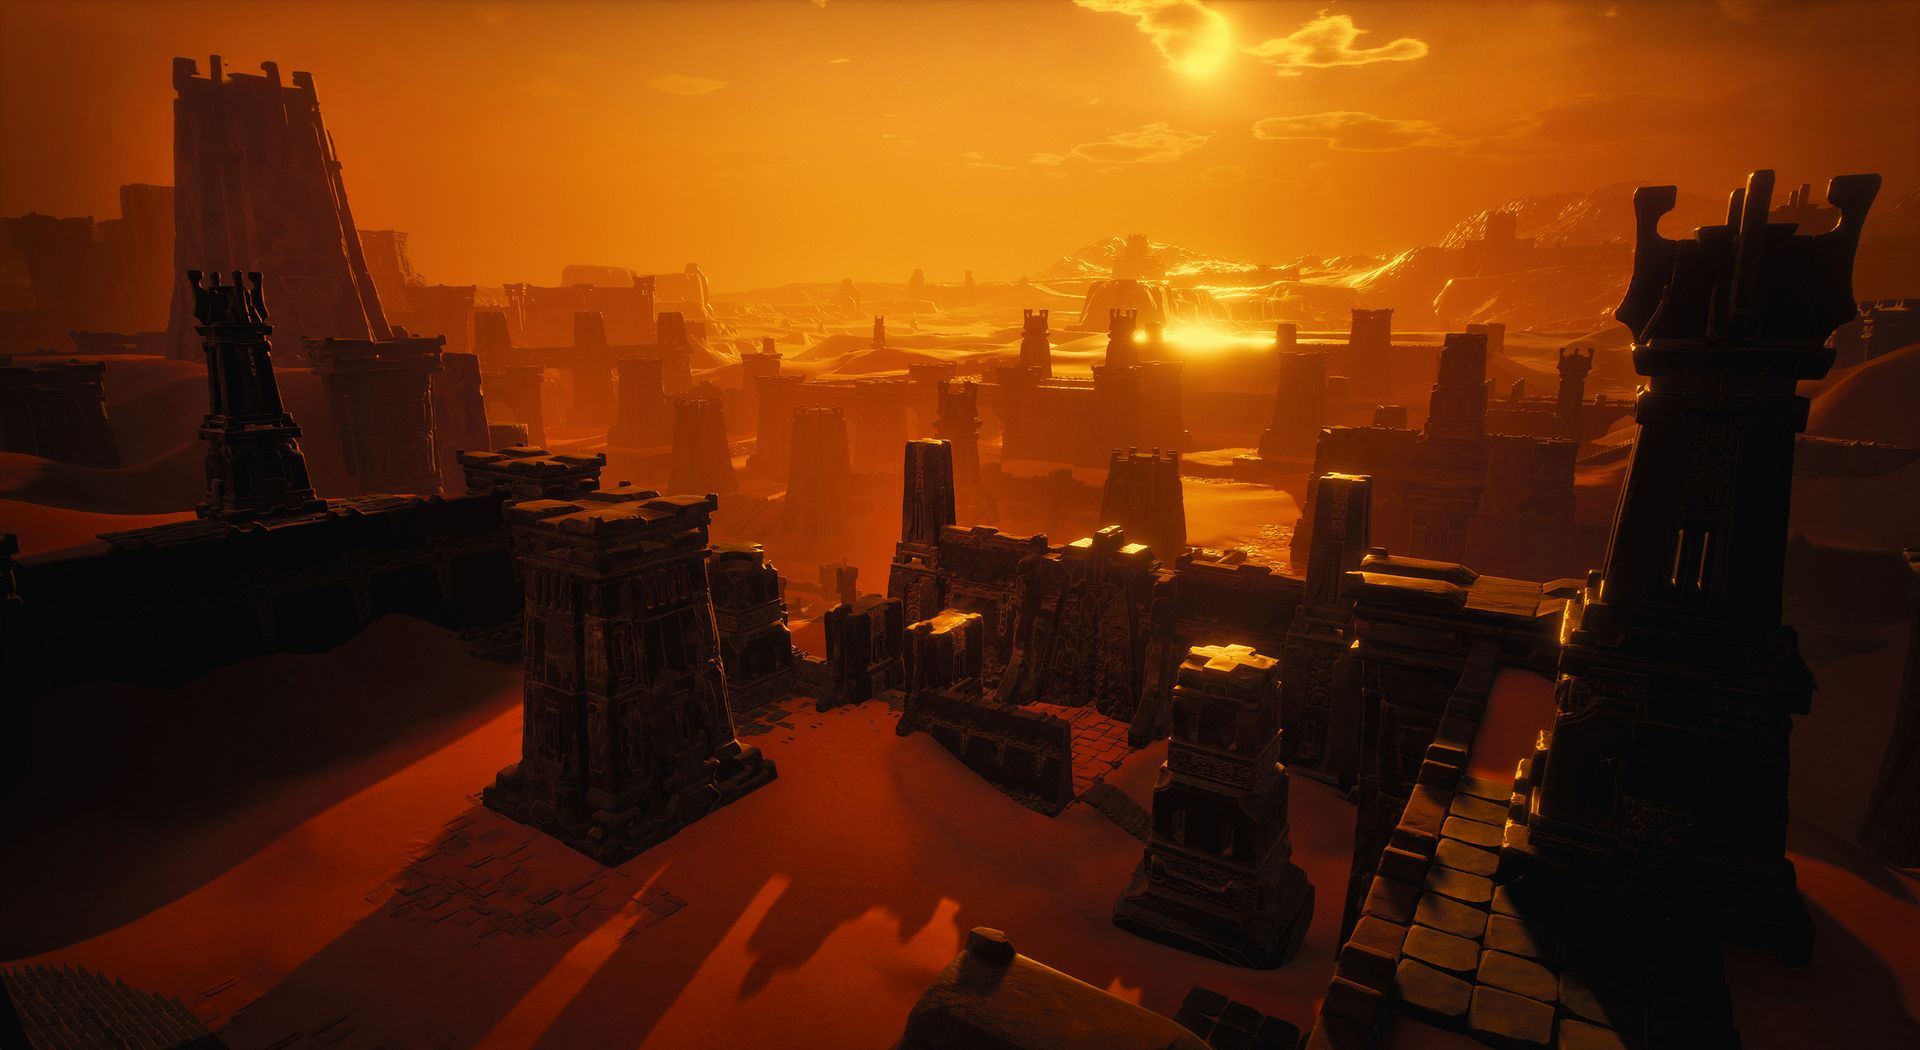 conan-exiles-improved-visuals-look-stunning-7